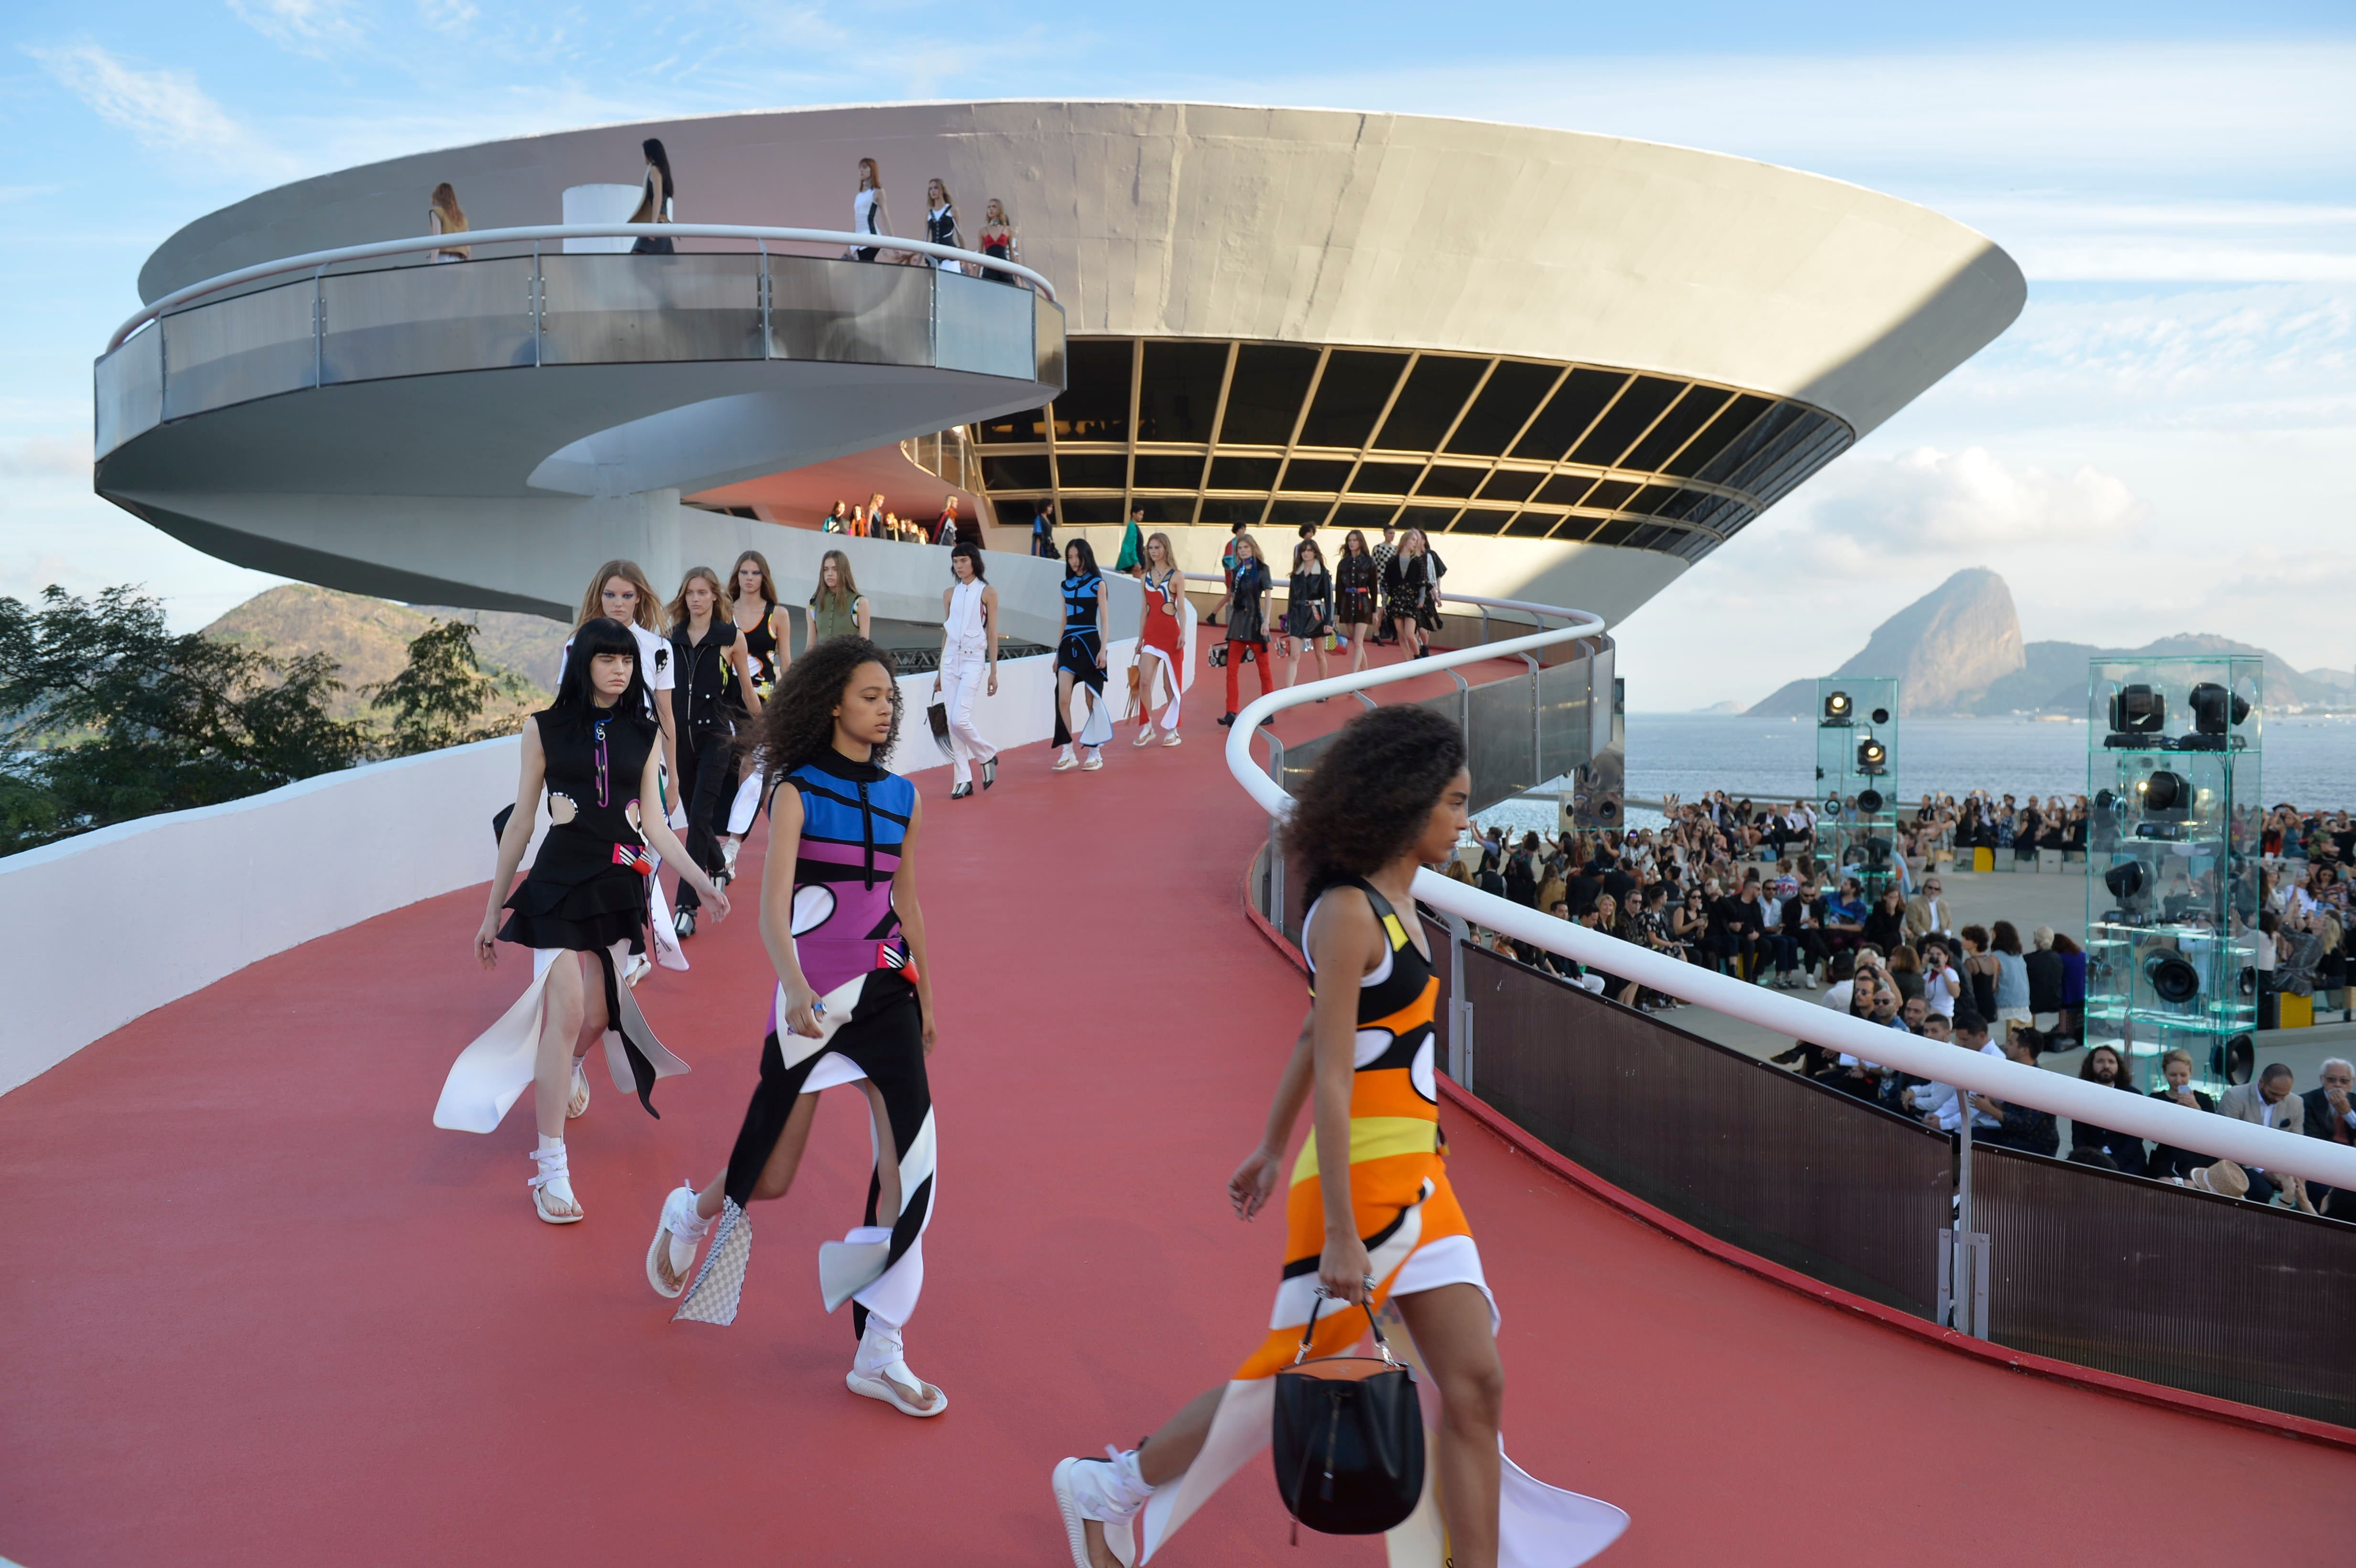 The Full Brazilian: Louis Vuitton comes to Rio, but with economic collapse and pandemics rife ...